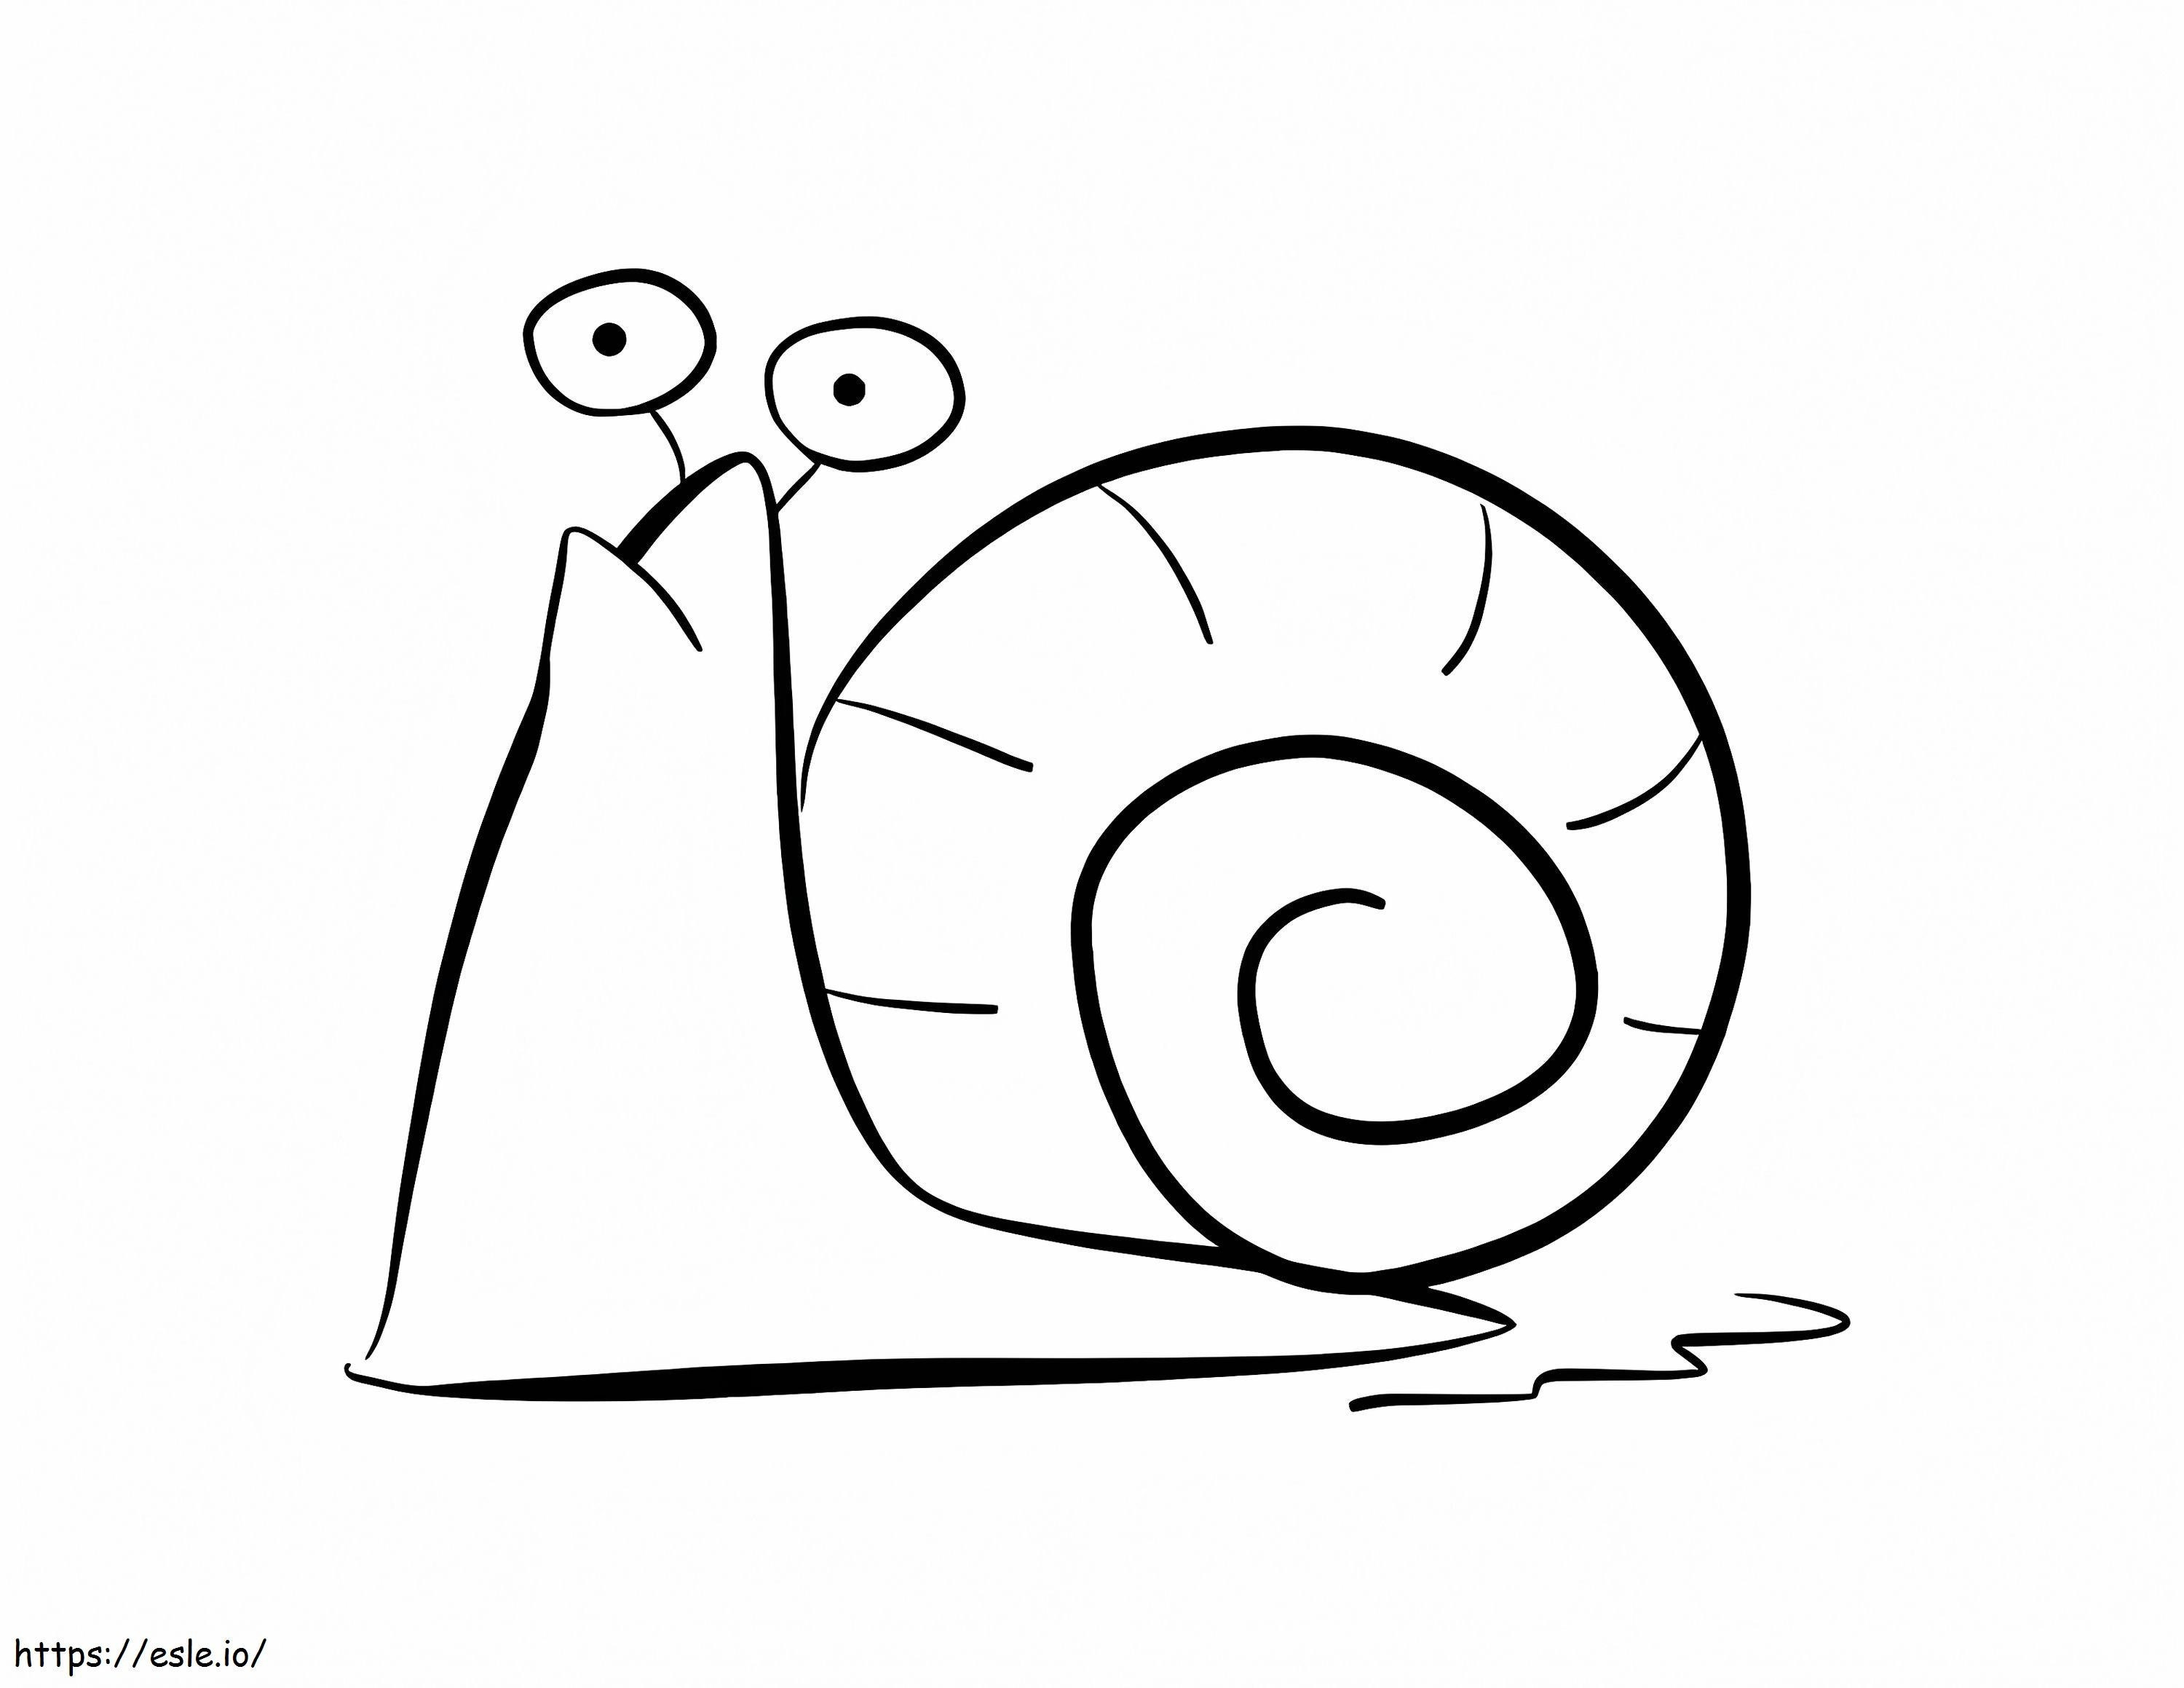 Snail 1 Coloring Page coloring page